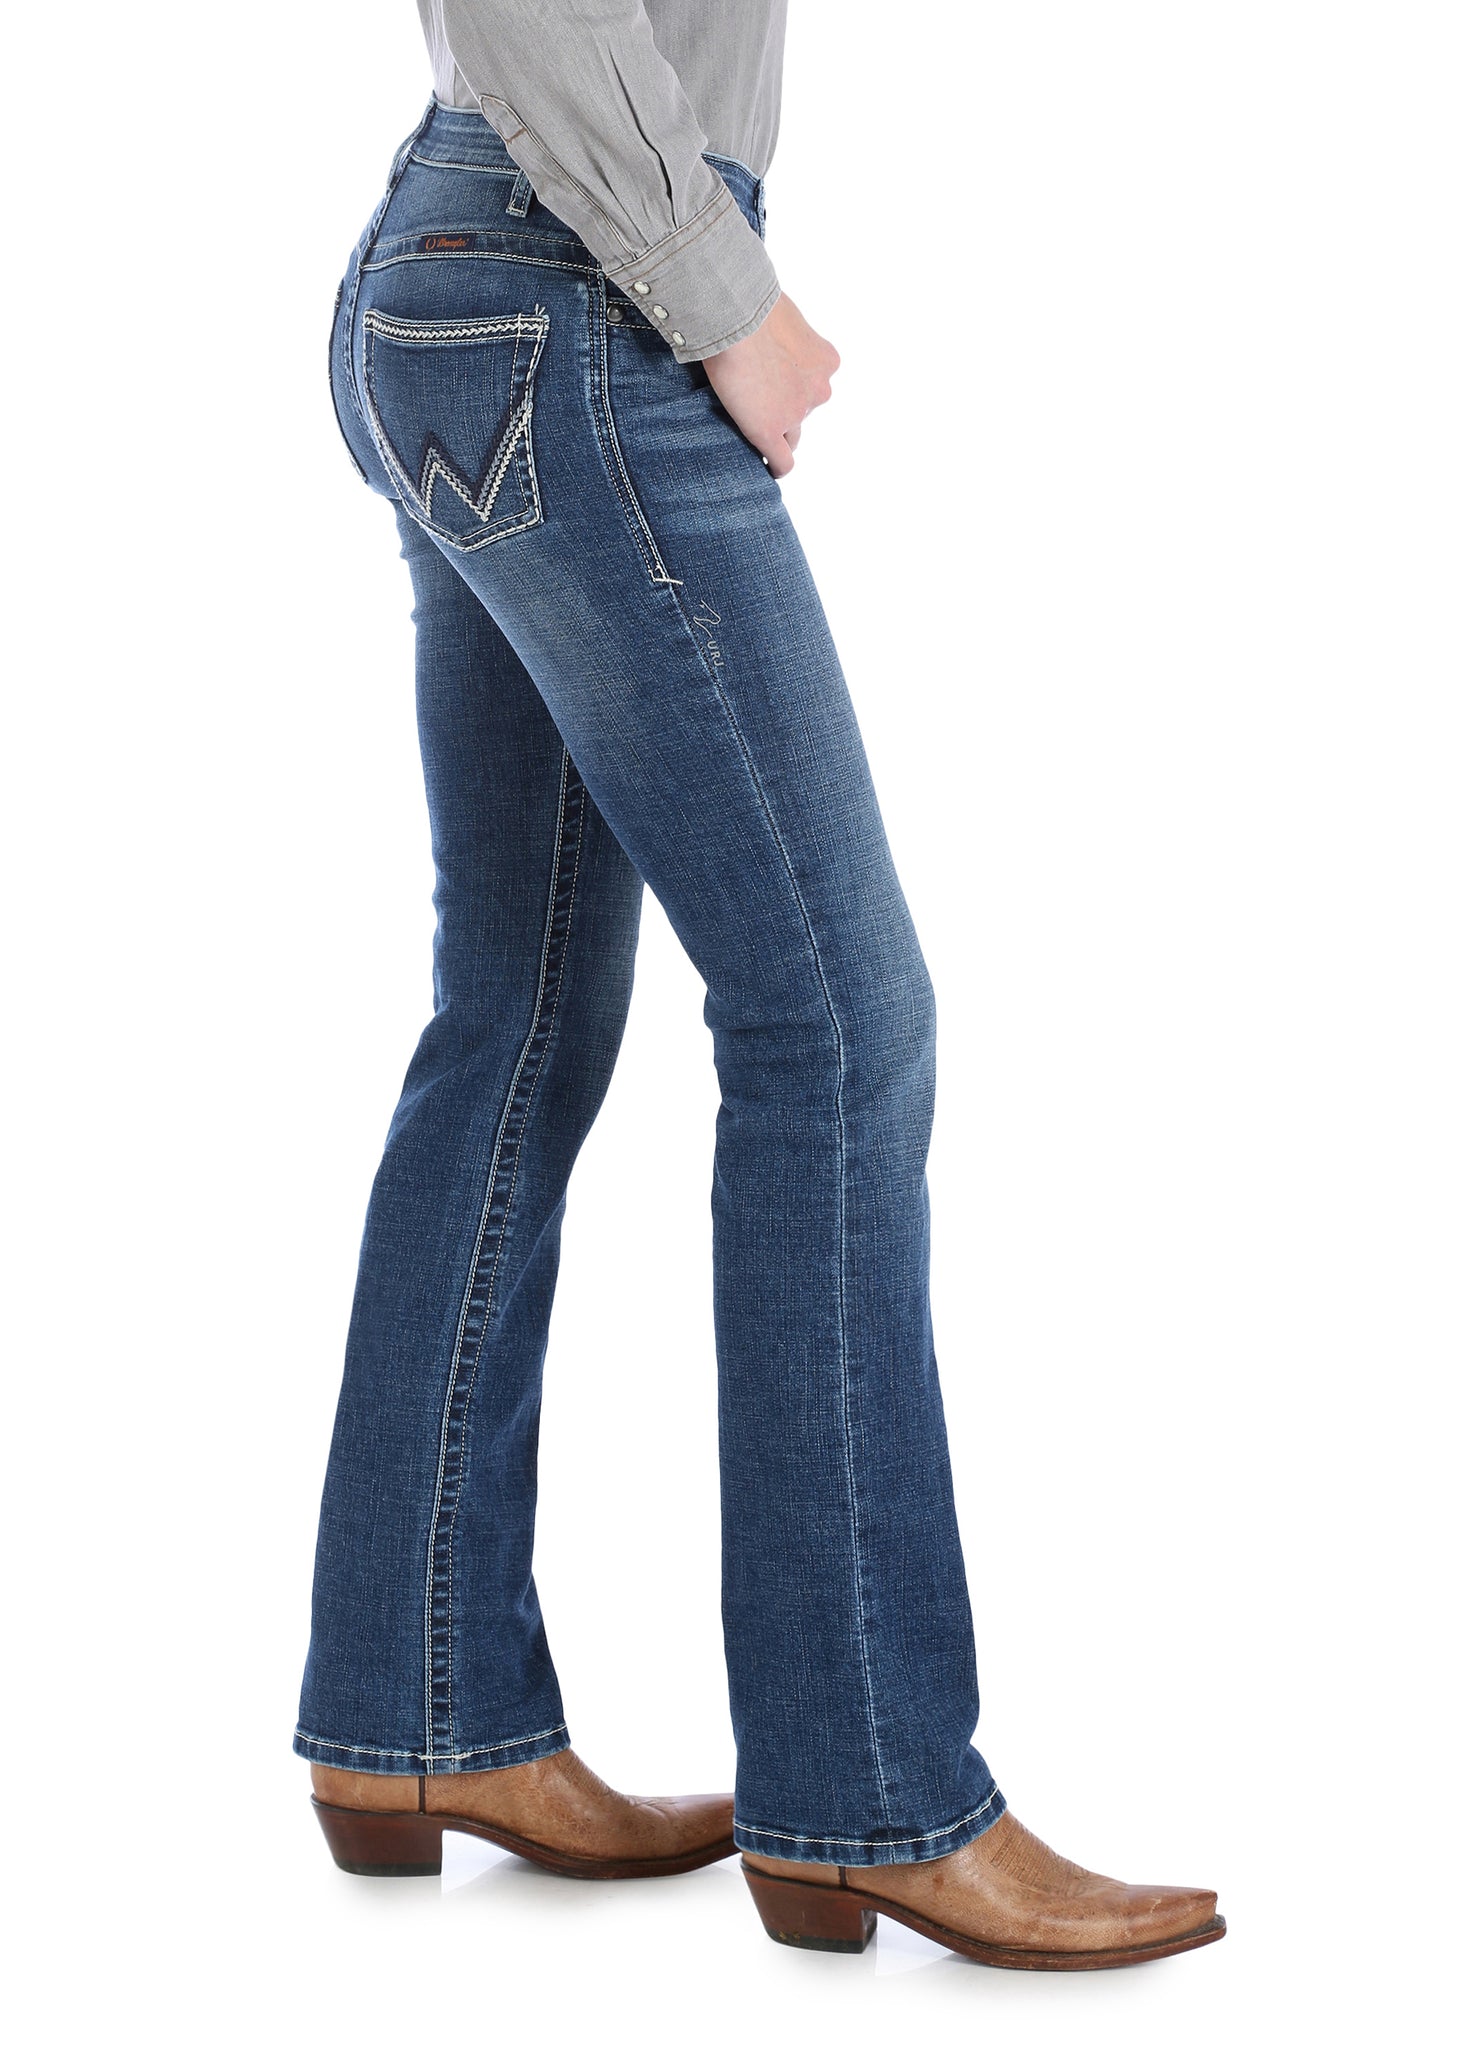 Wrangler Ultimate Riding Willow Women's Jeans